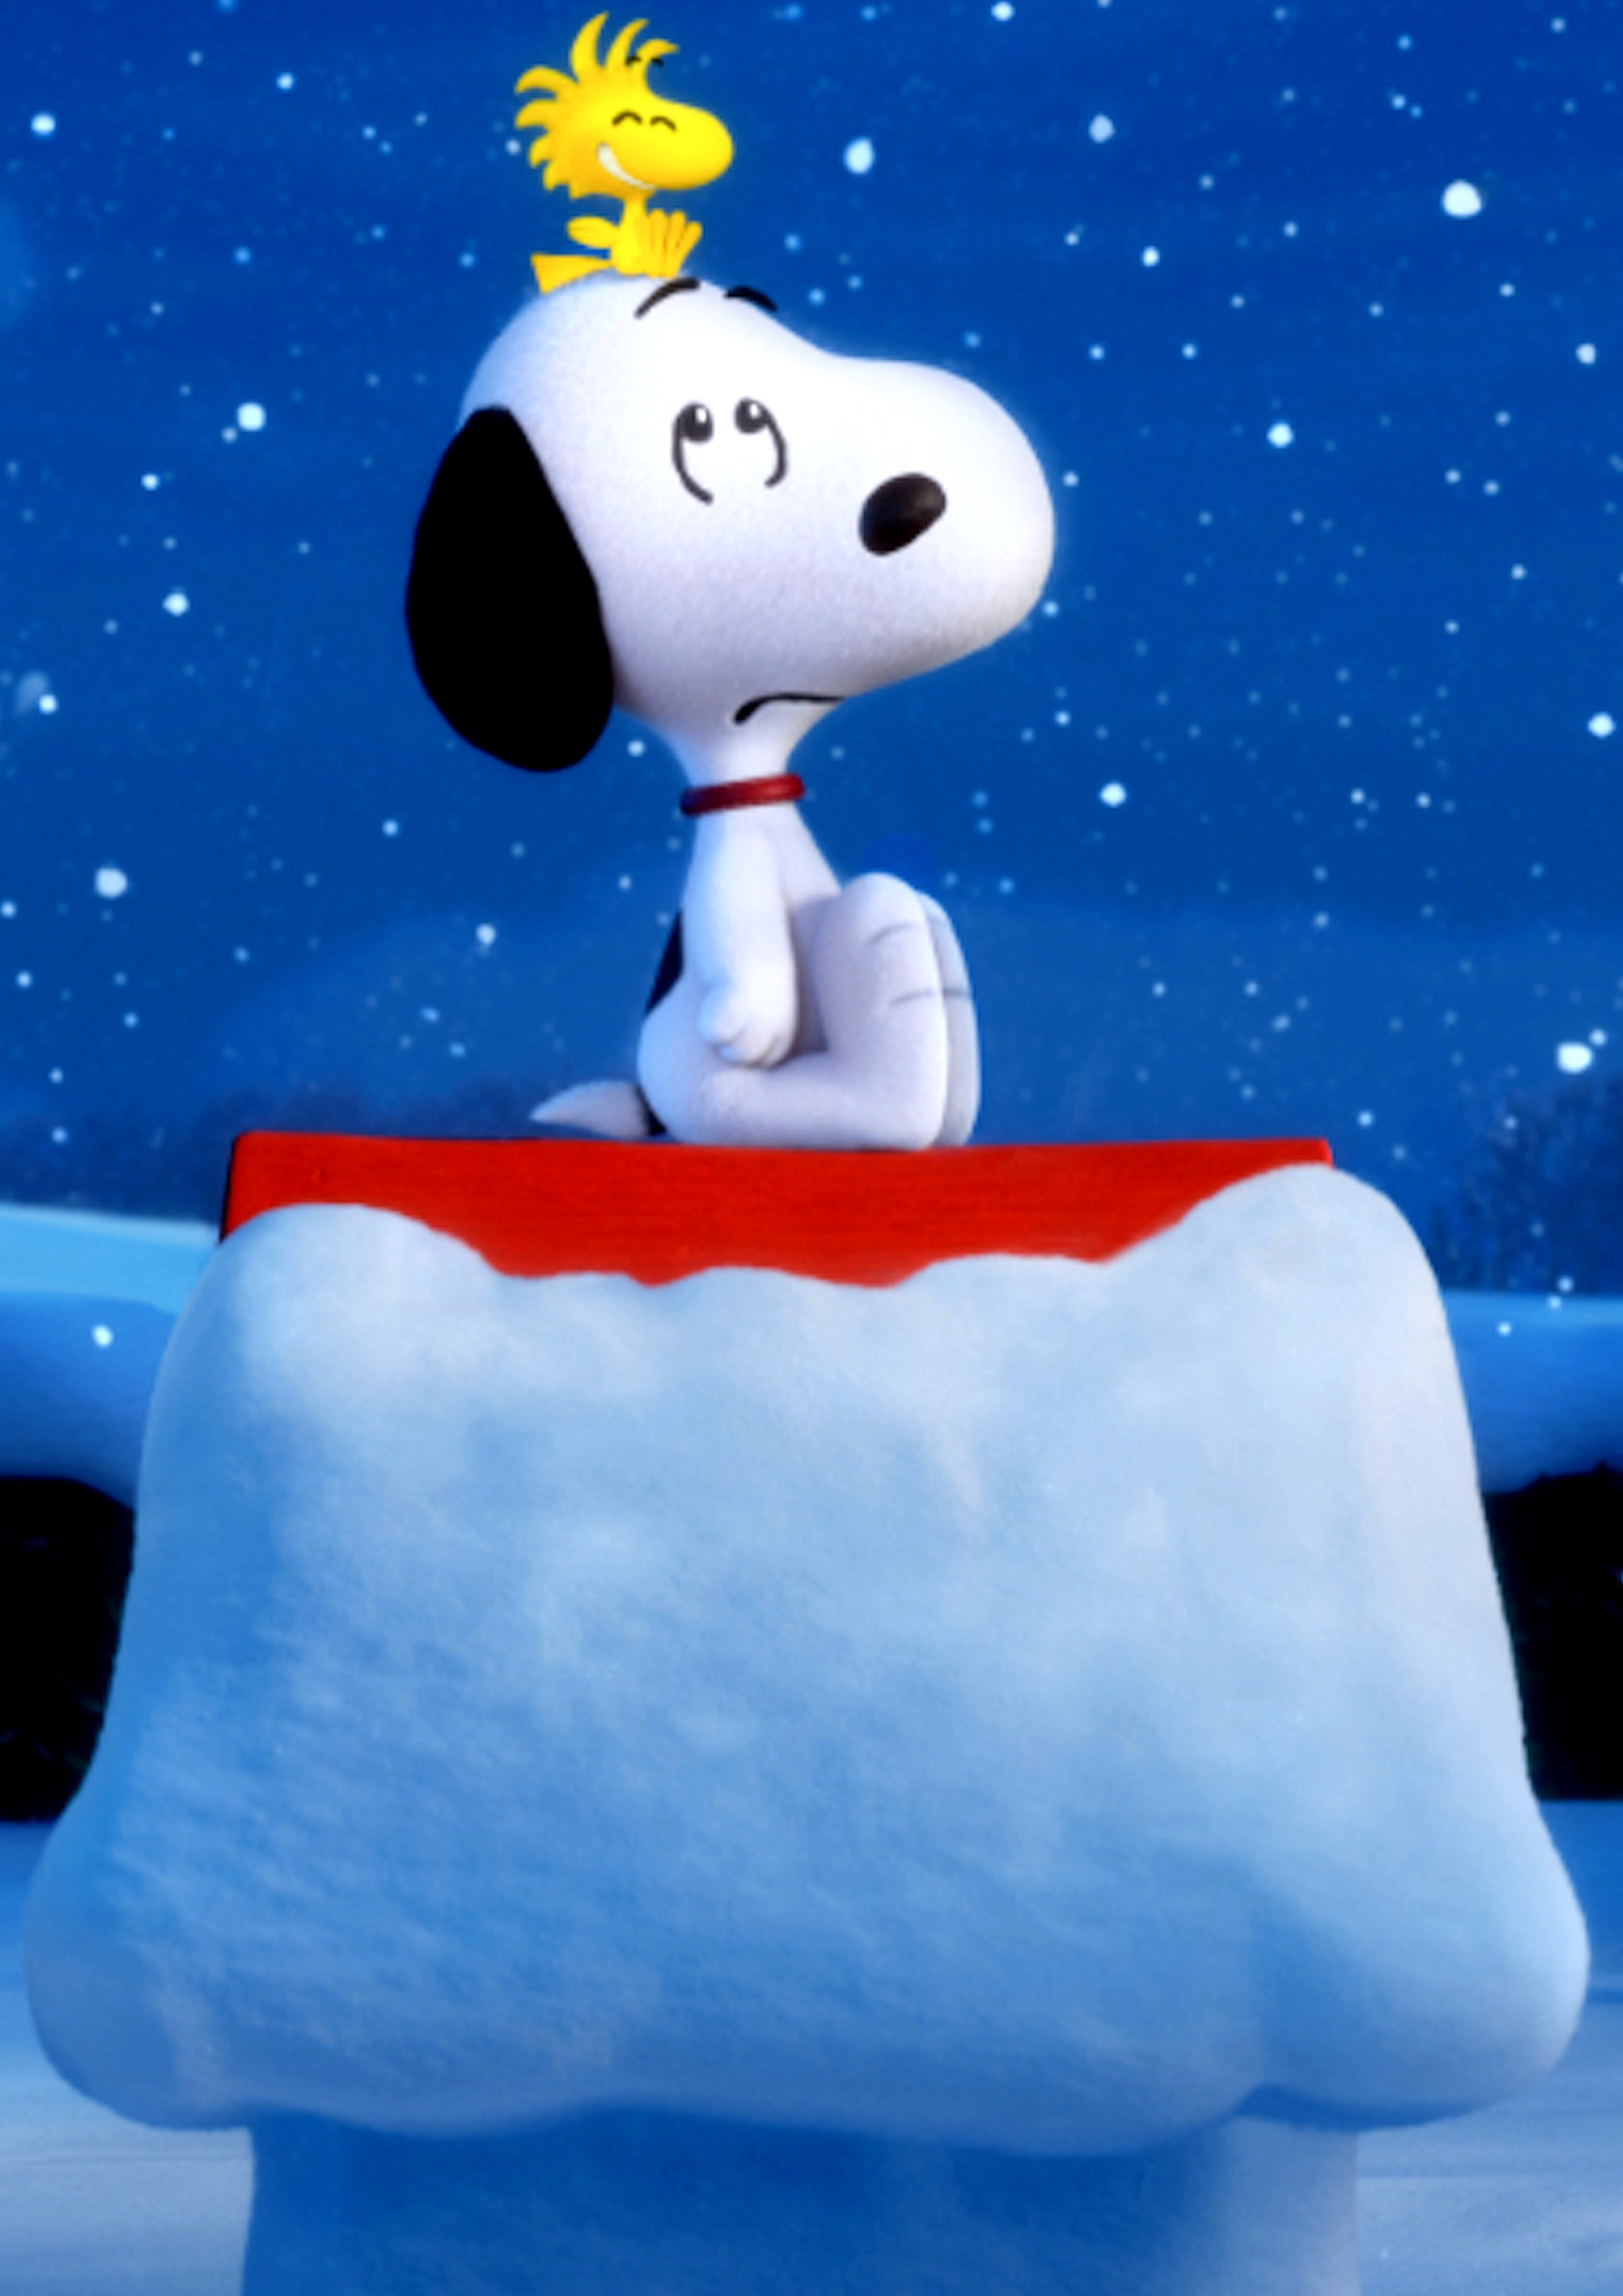 The Peanuts Movie (Snoopy And Woodstock) by BradSnoopy97